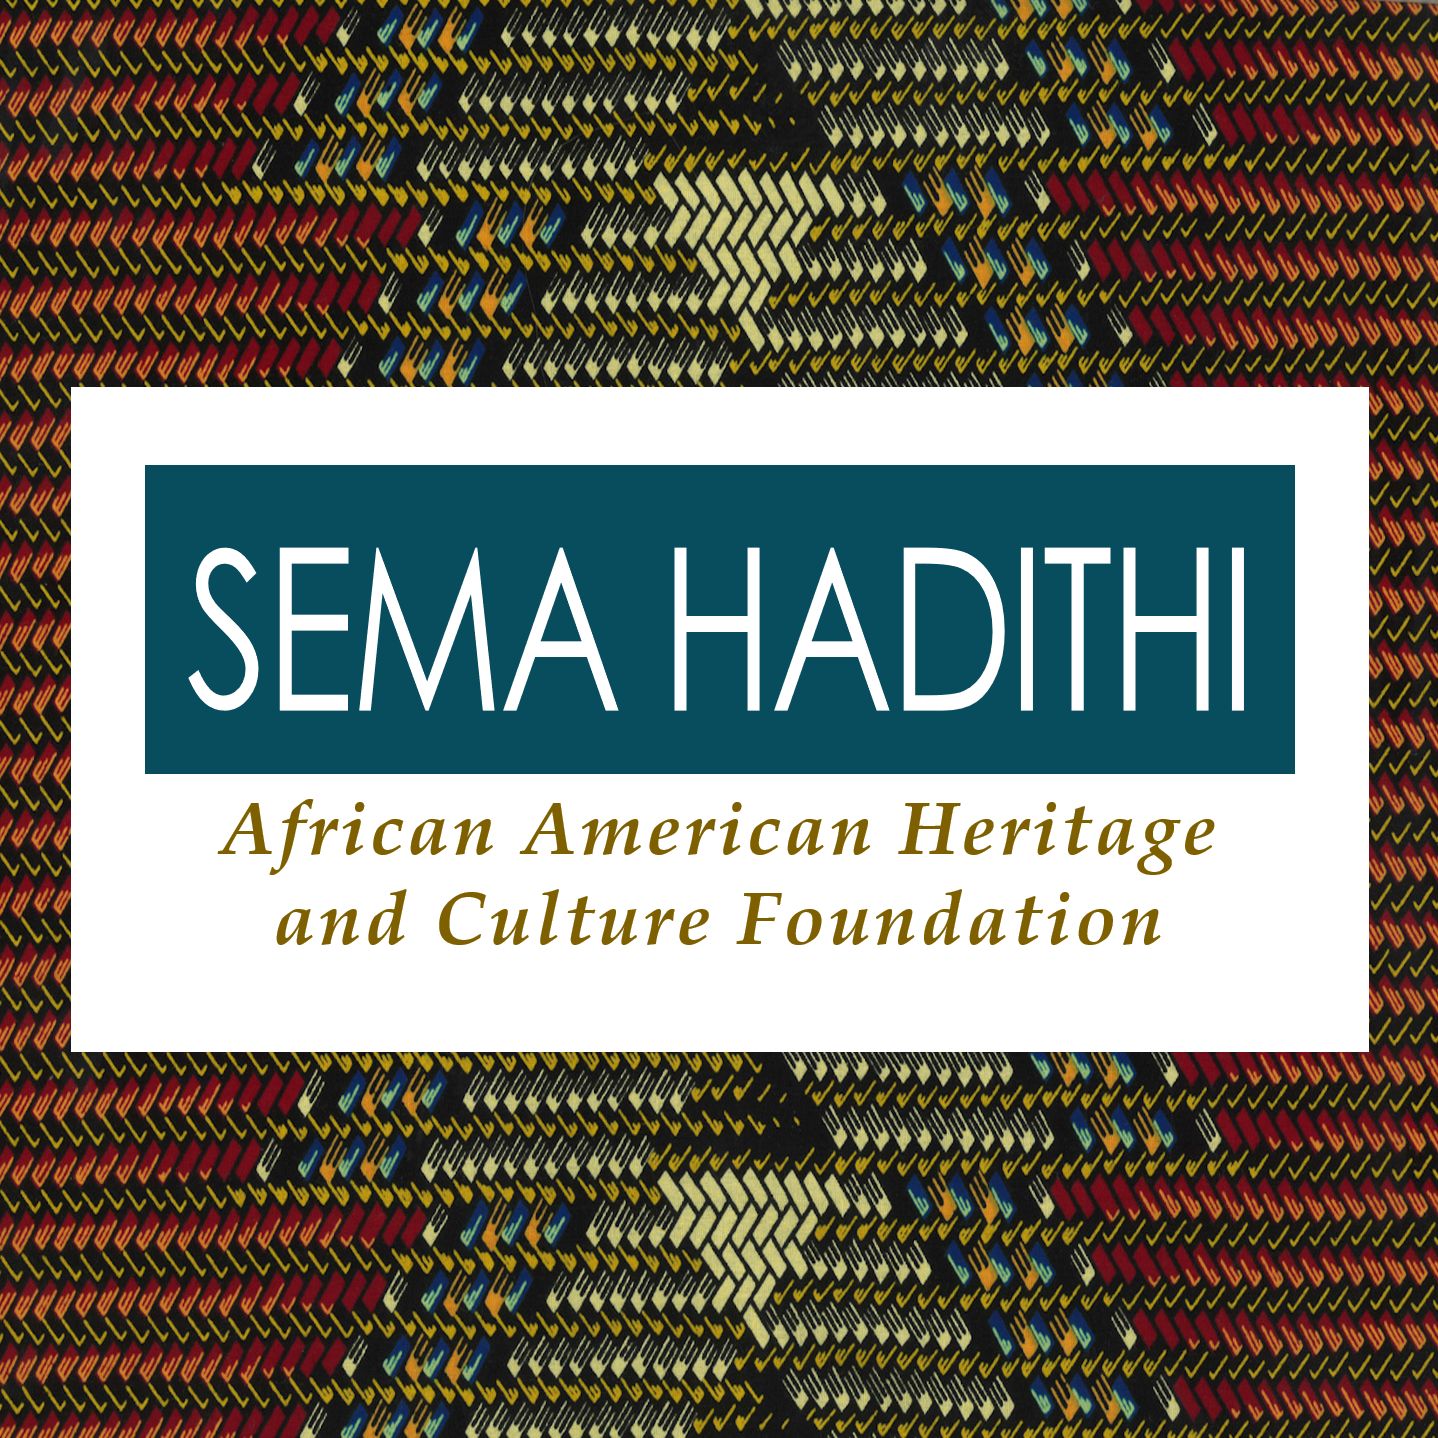 Sema Hadithi African American Heritage and Cultrue FoundationFoundation